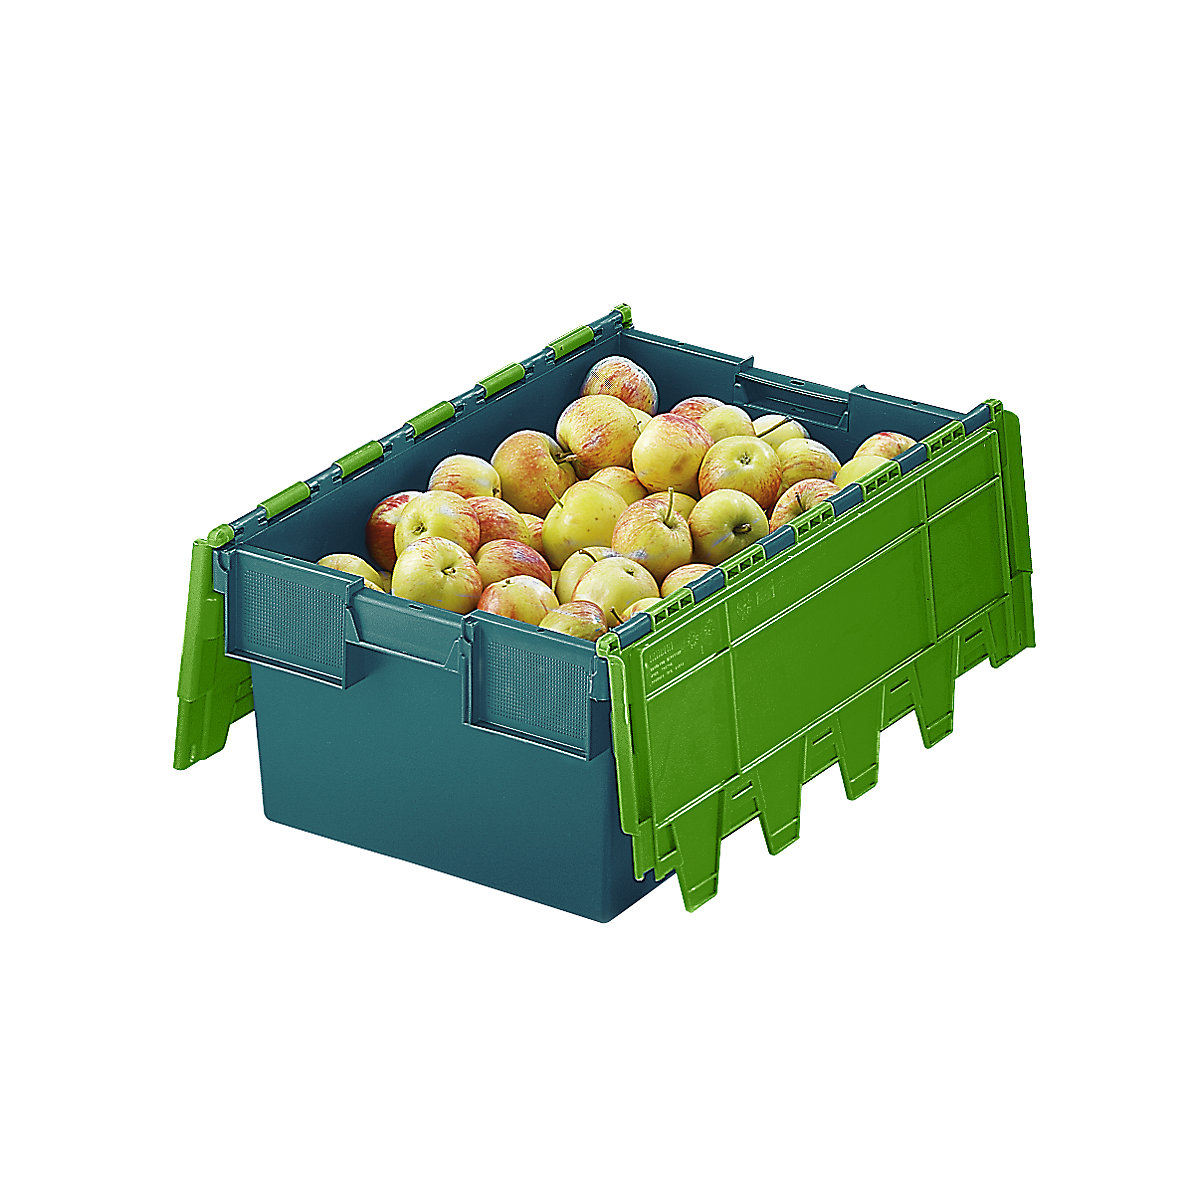 KAIMAN reusable stacking container, capacity 40 litres, LxWxH 600 x 400 x 250 mm, green